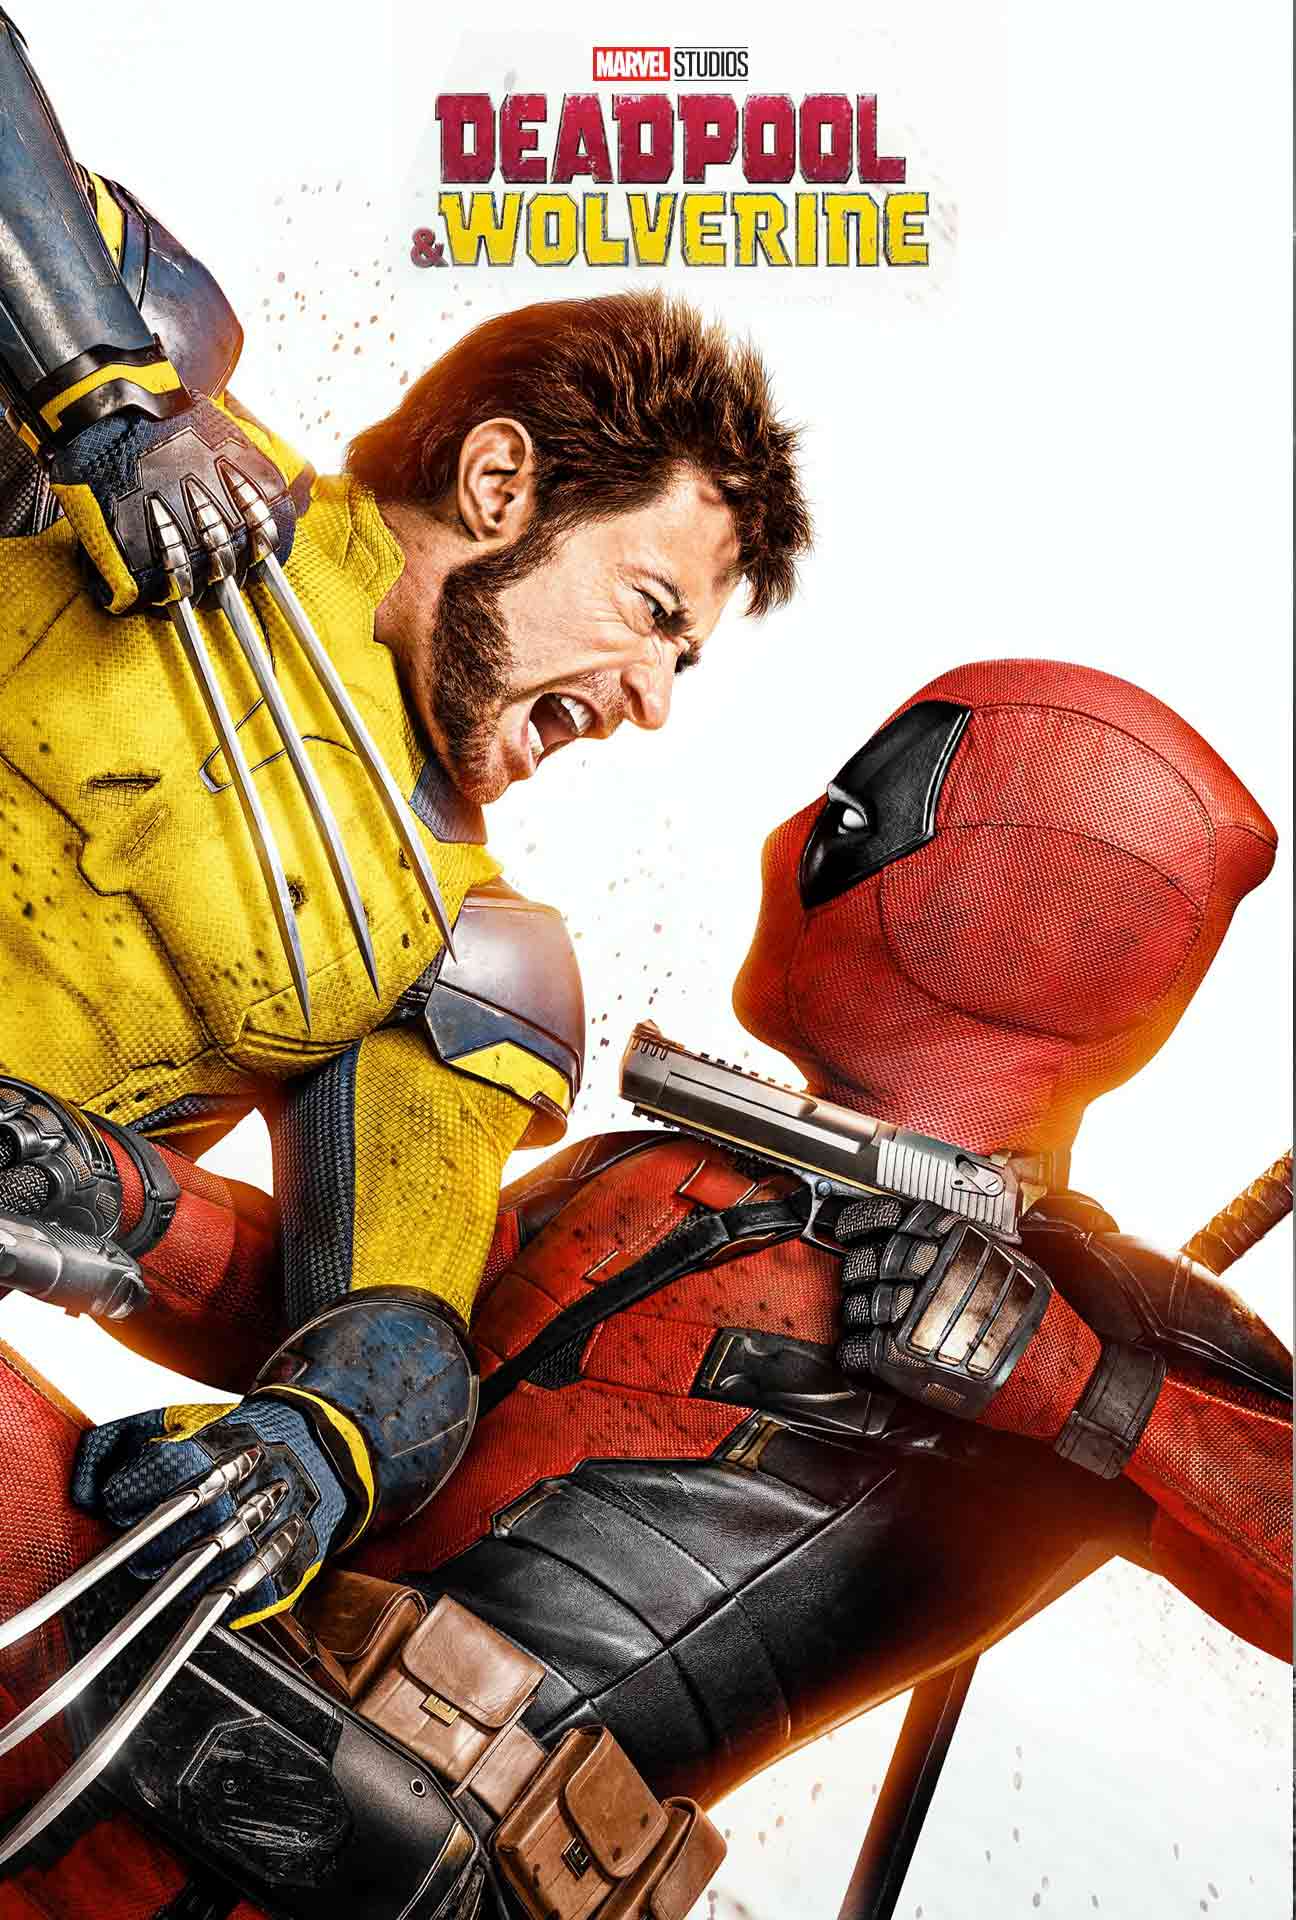 Movie Poster for Deadpool & Wolverine.